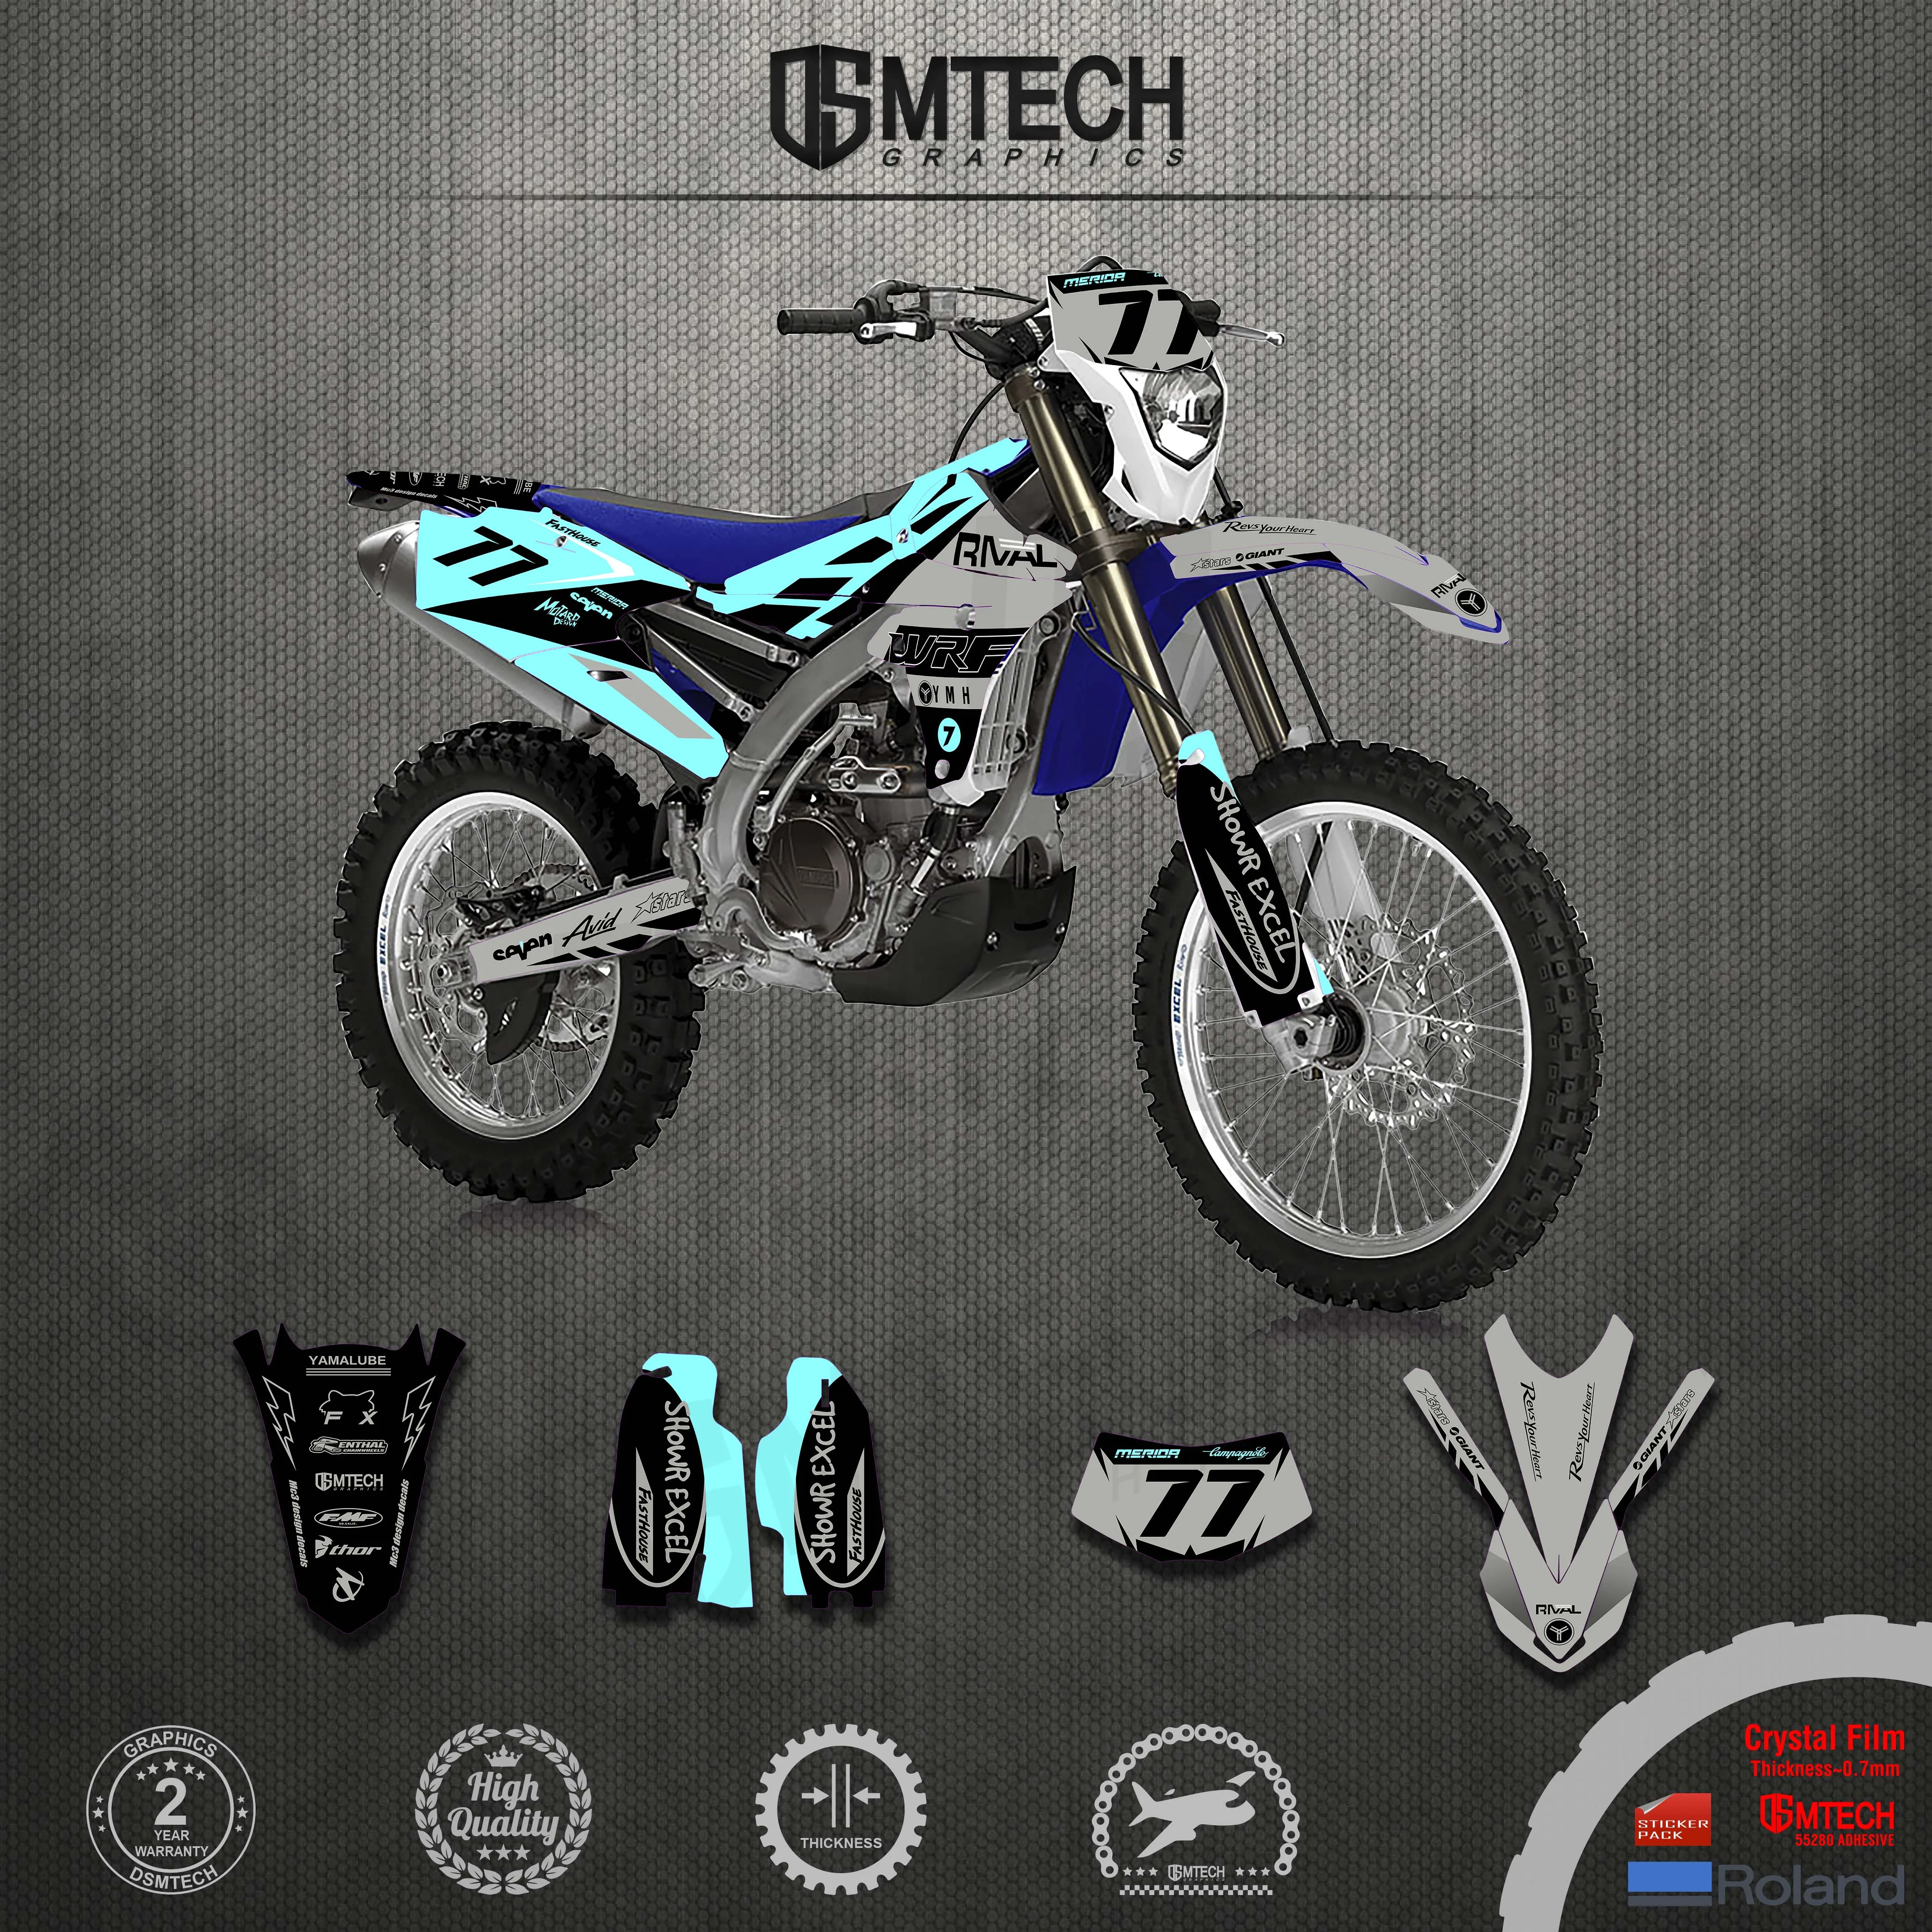 DSMTECH Motorcycle team Backgrounds Graphics Stickers Decals kits For YAMAHA WRF250 WR250F 2015 2016 2017 2018 2019 WR 250F WRF